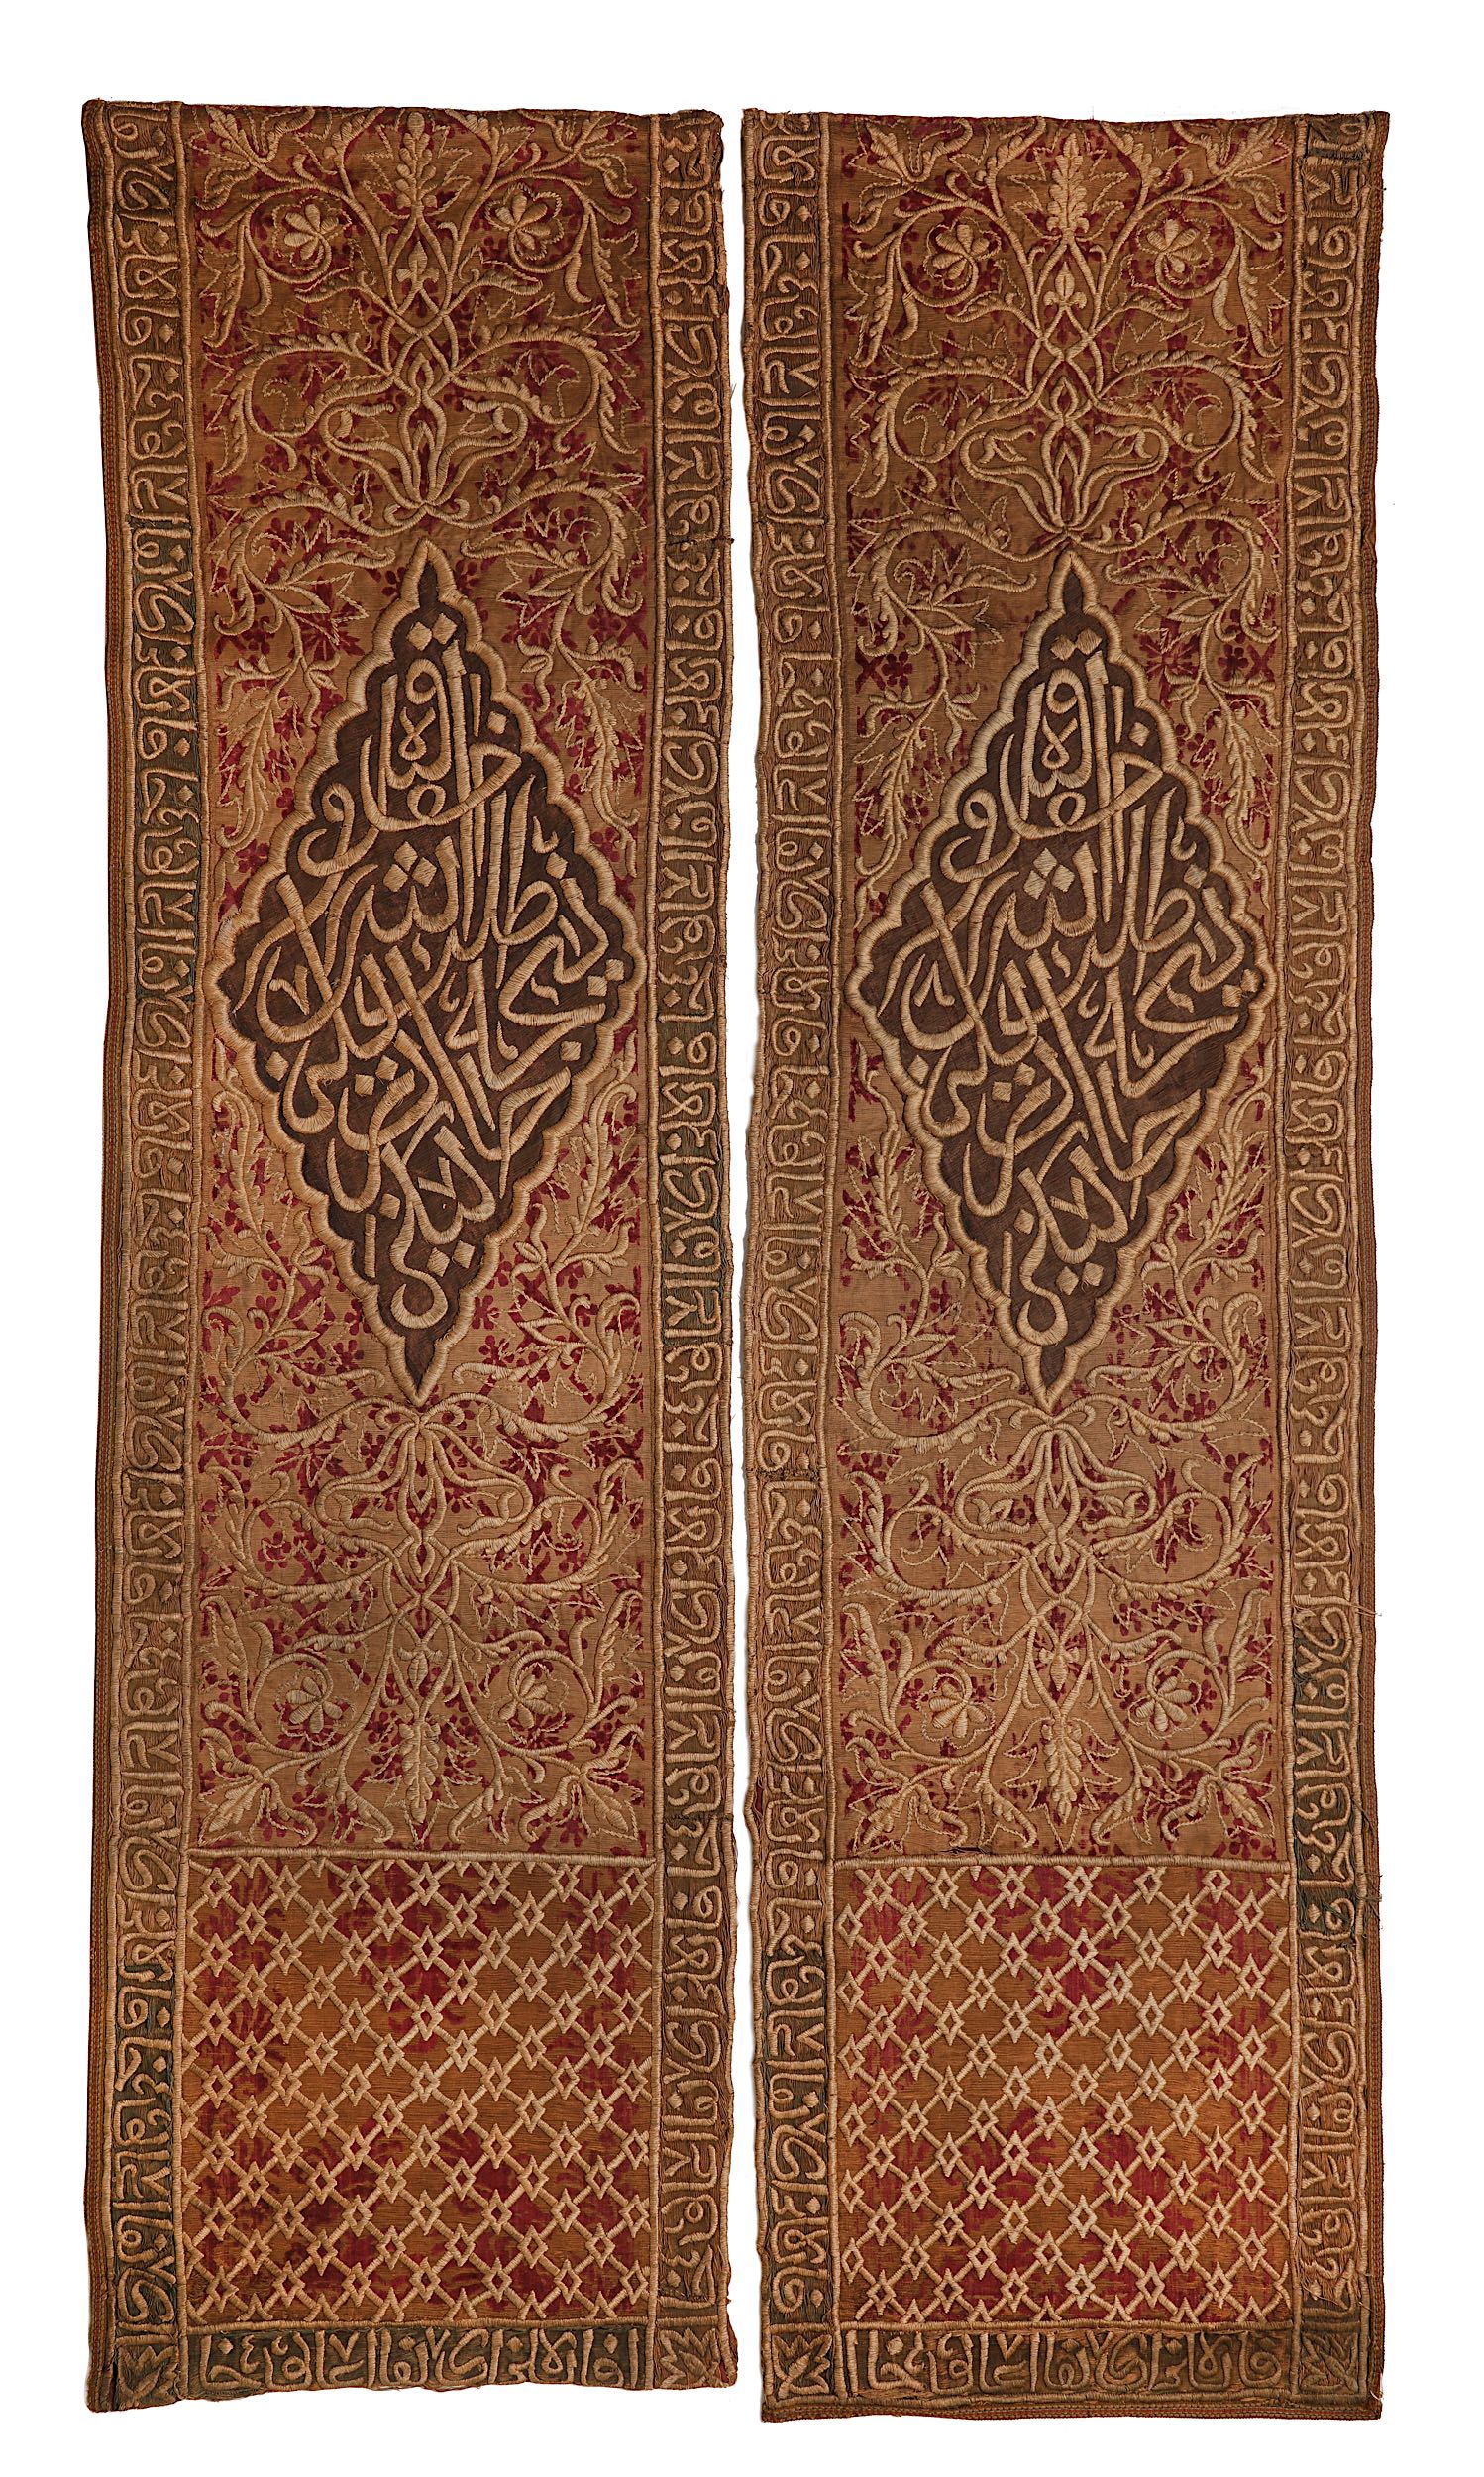 TWO EMBROIDERED VELVET WALL HANGINGS.